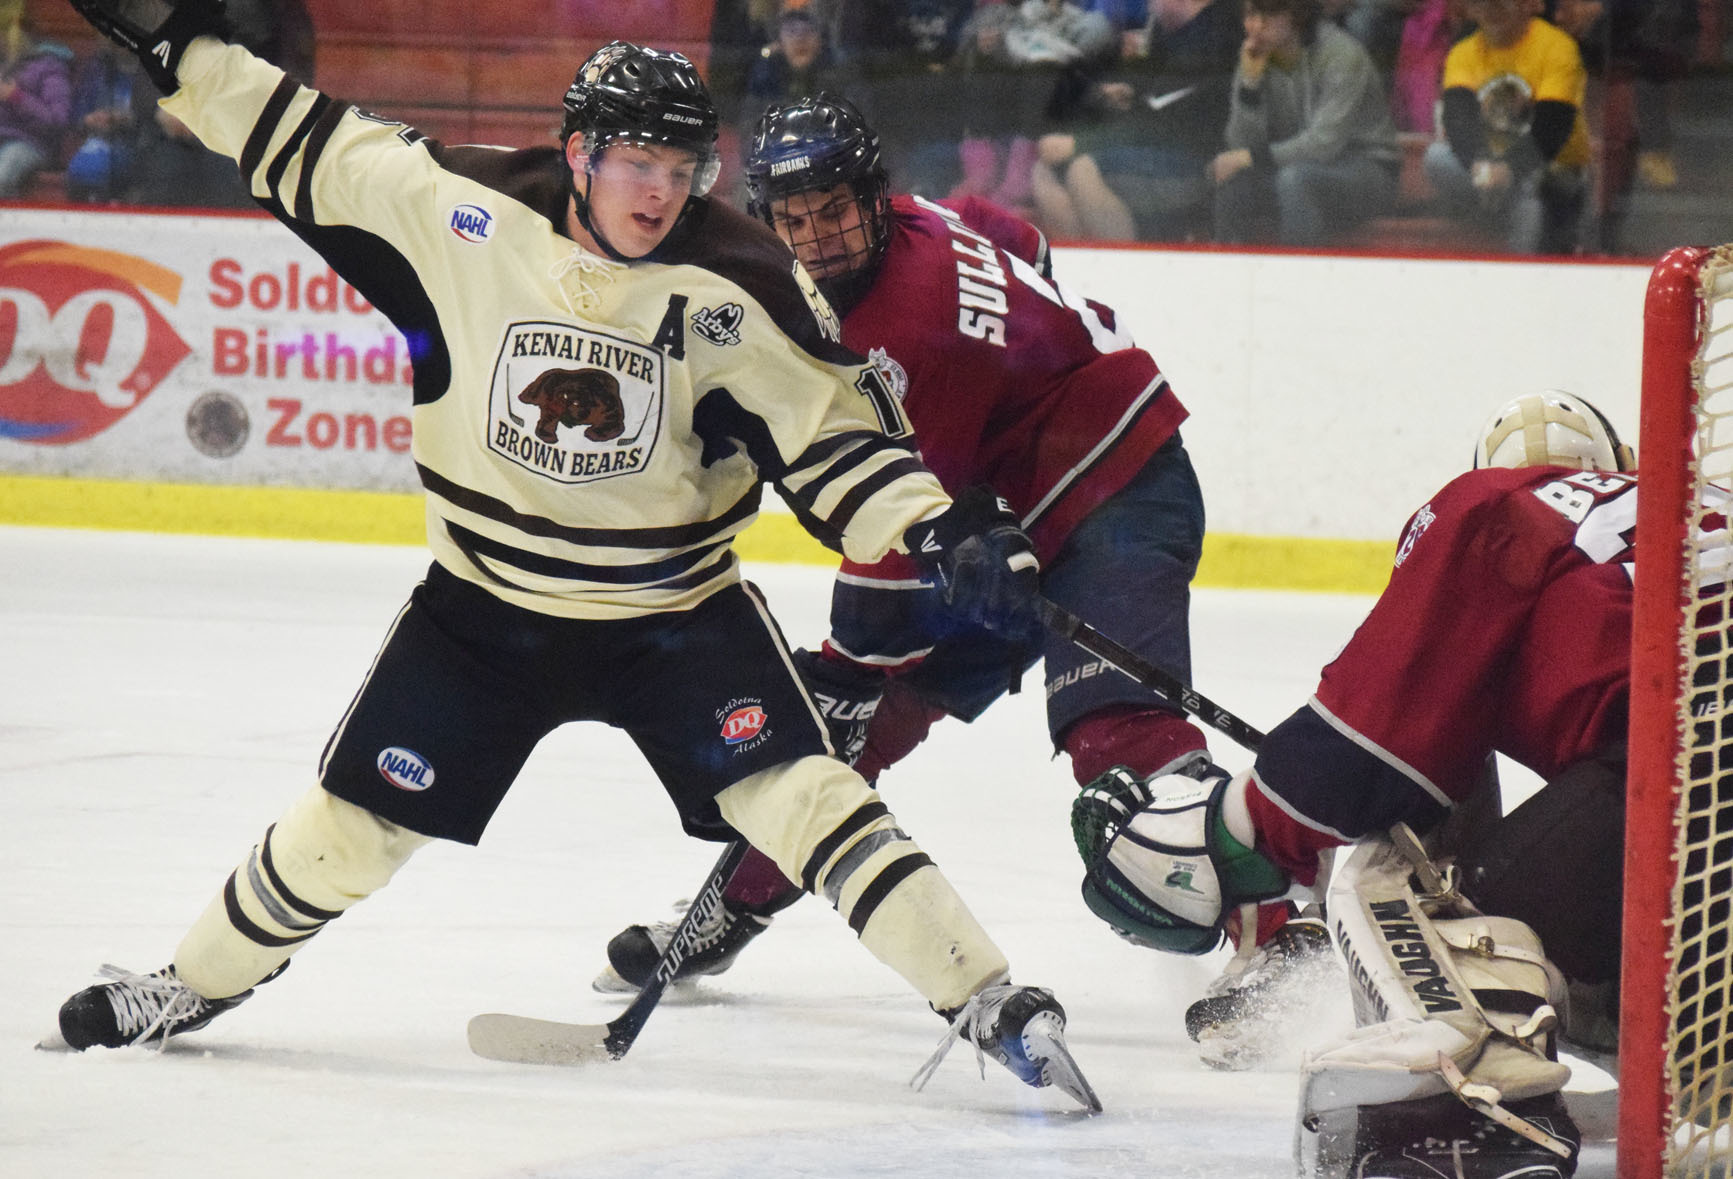 Brown Bears skater Luke Radetic works the puck across the Fairbanks crease in front of Ice Dogs goalie Josh Benson Friday night at the Soldotna Regional Sports Complex. (Photo by Joey Klecka/Peninsula Clarion)